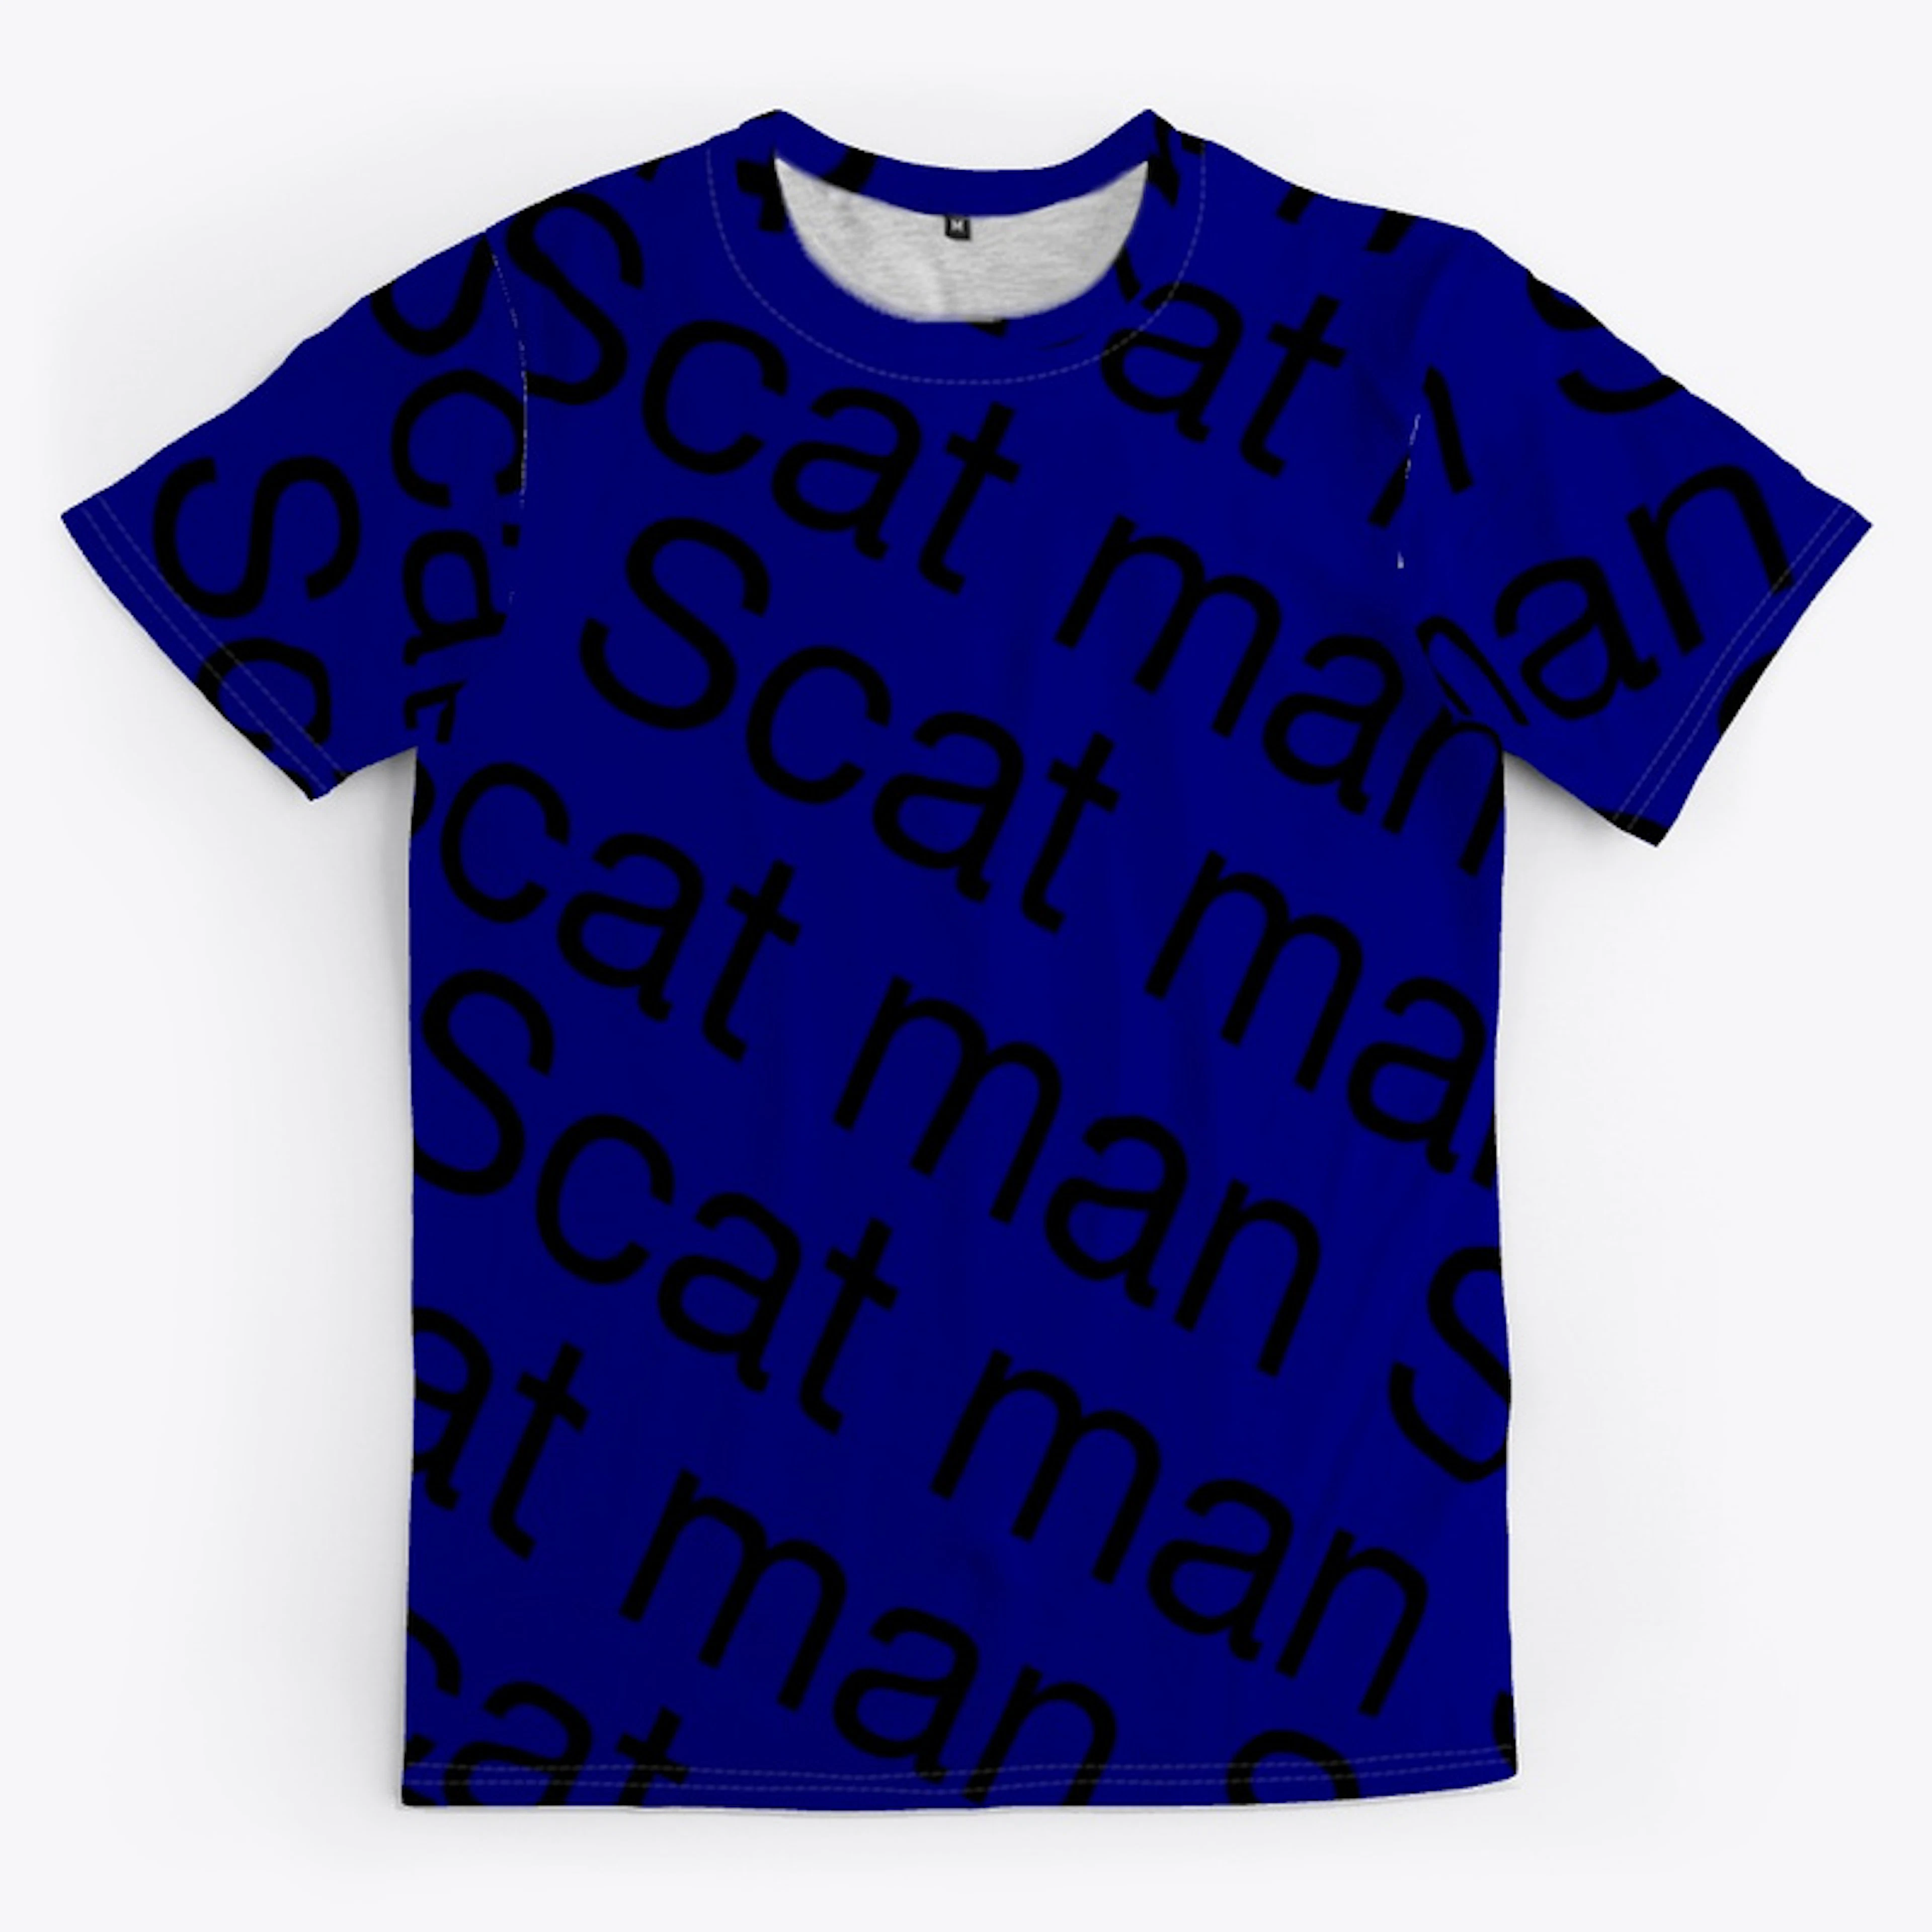 THE SCAT MAN COLLECTION